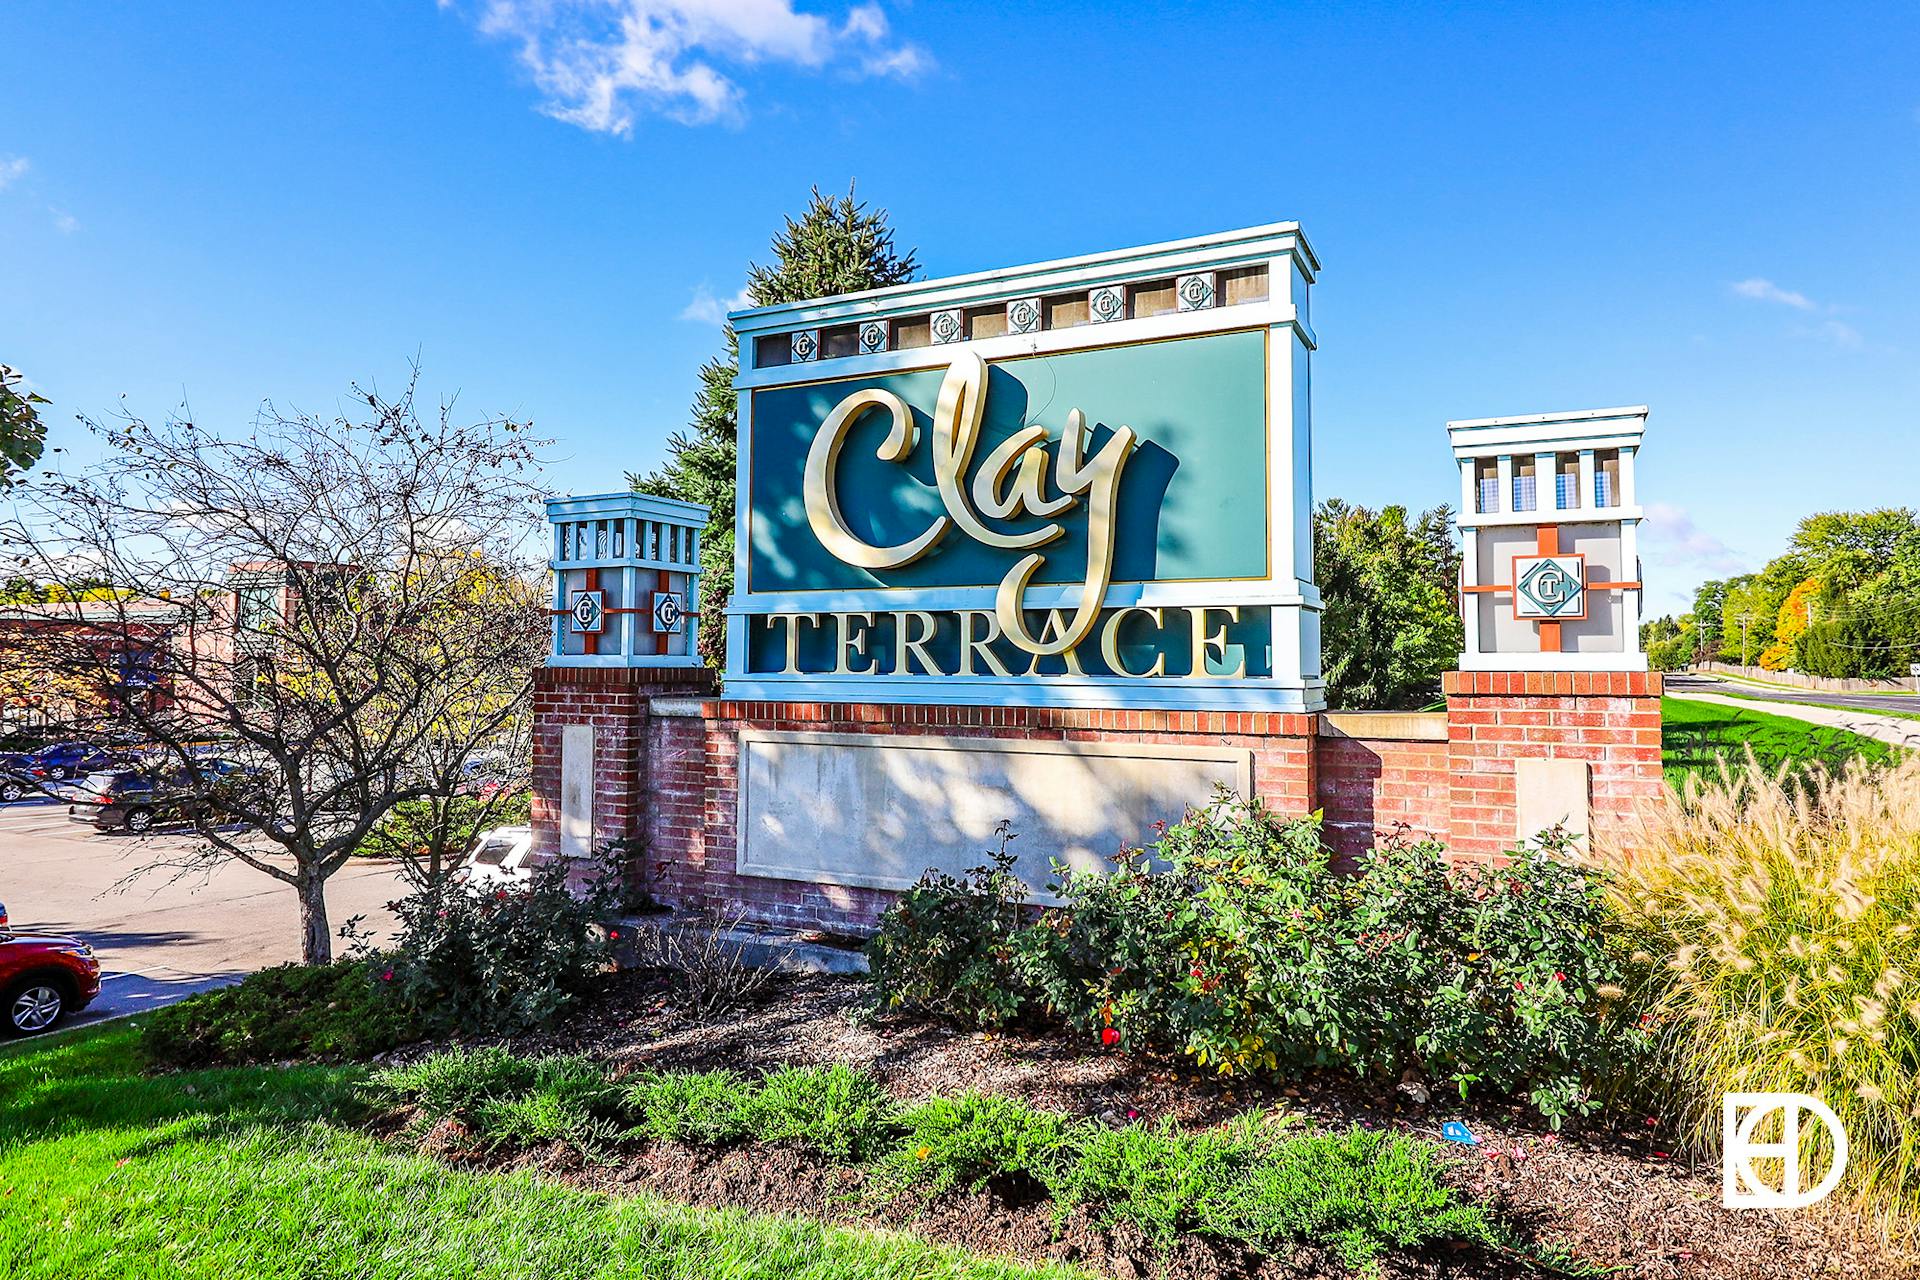 Entrance sign to Clay Terrace Mall